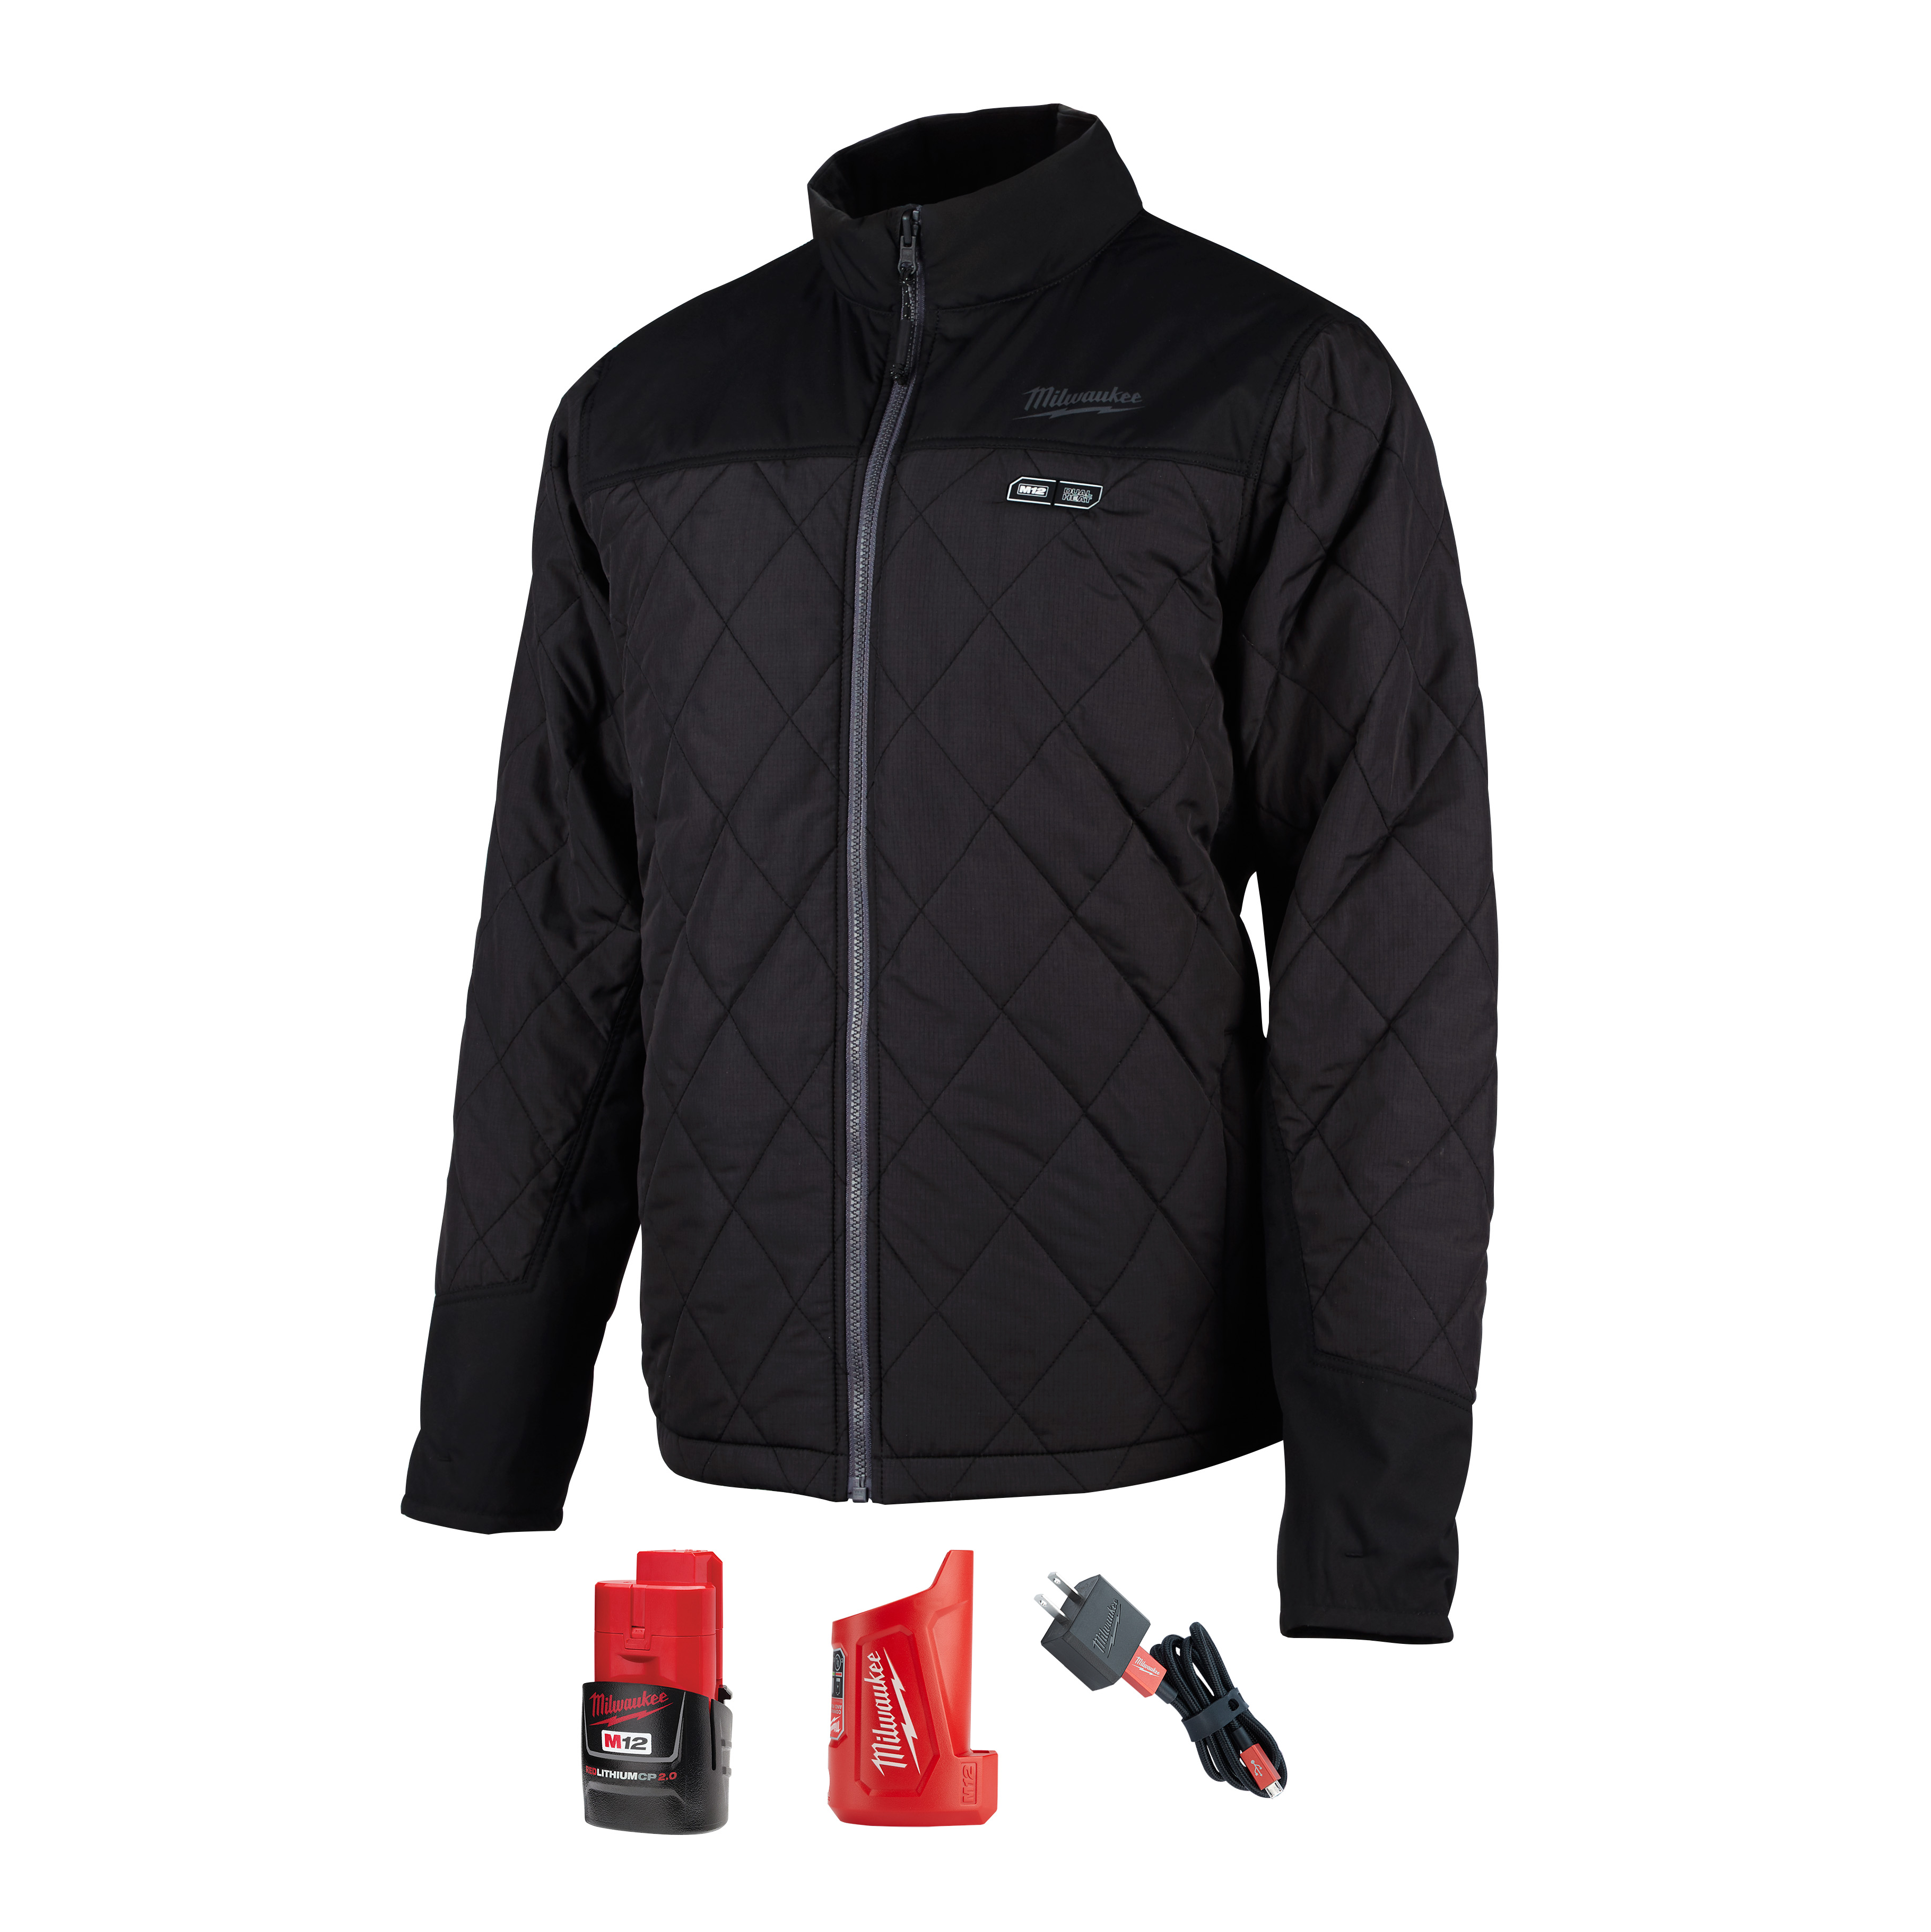 Powered by M12™ REDLITHIUM™ battery technology, Milwaukee® M12™ heated AXIS™ jackets use carbon fiber heating elements to create and distribute heat to the chest, back, and shoulders. A one-touch LED controller allows users to select from three heat settings, delivering ideal heat for any environment. The new quick-heat function allows users to feel heat 3X faster than previous jackets and market competitors. Hybrid construction featuring the new AXIS™ Ripstop polyester provides a lightweight, compressible design that can be used as an outer shell or a mid-layer jacket, and provides wind and water resistance to survive the elements.